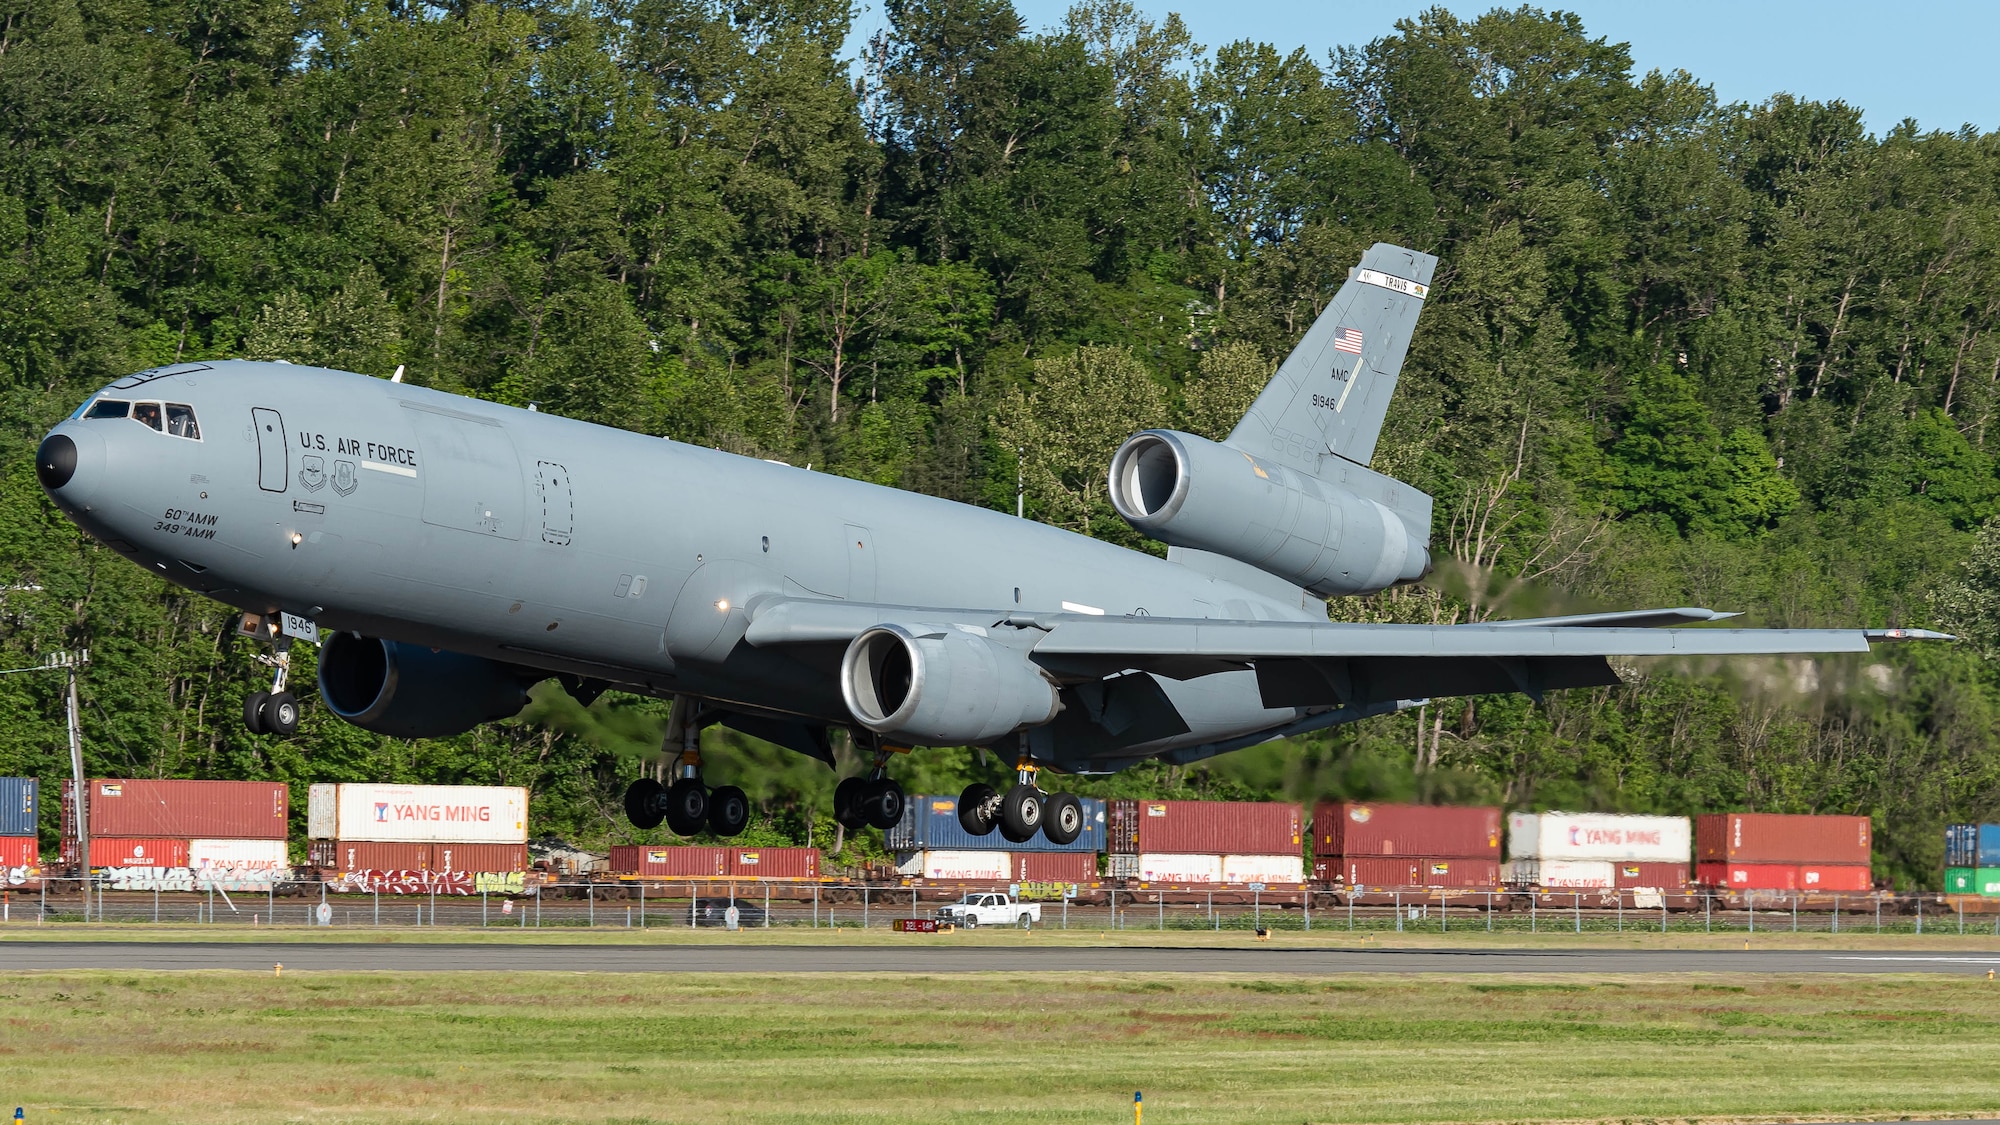 A KC-10 Extender from Travis Air Force Base, California, lands on the runway May 14, 2021 at King County International Airport-Boeing Field, Seattle, Washington.